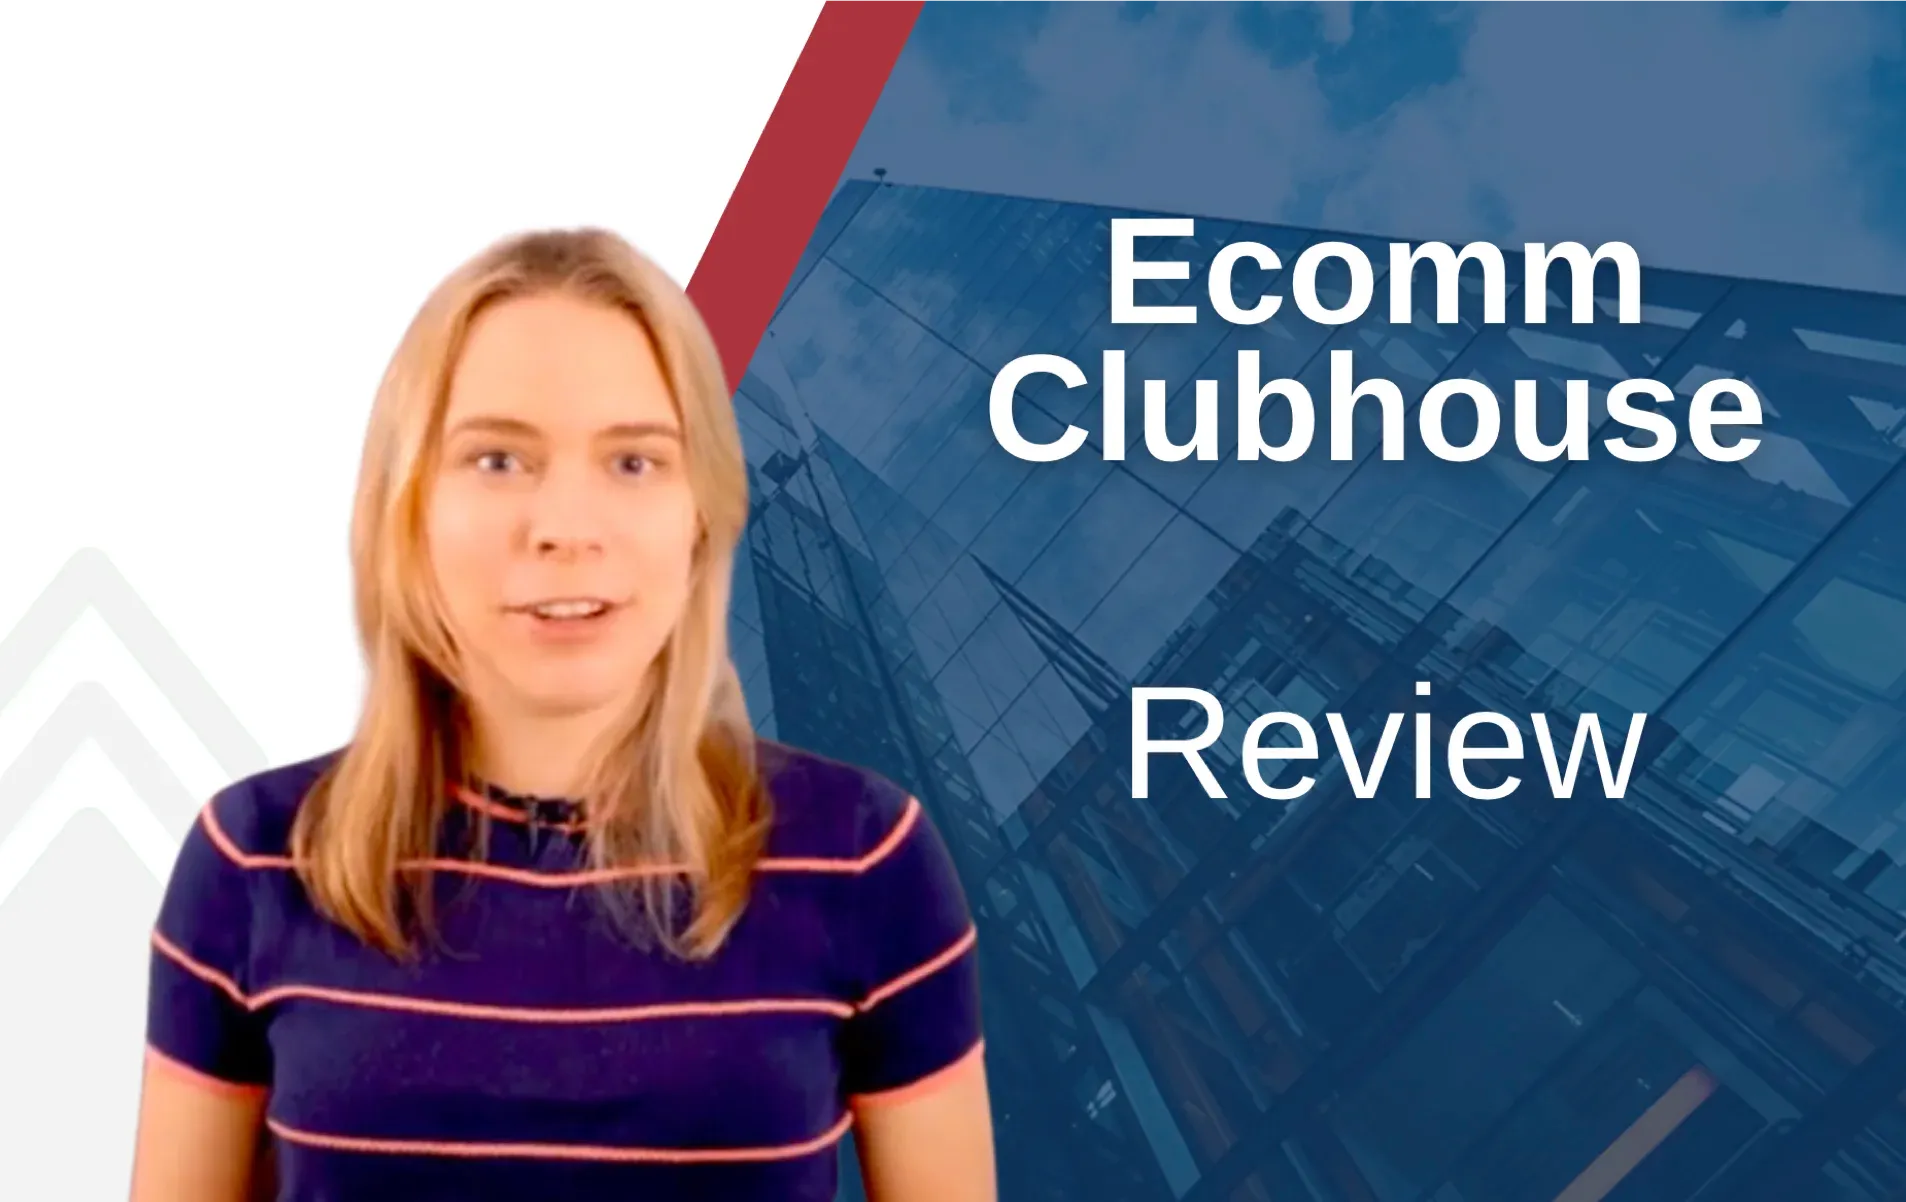 Ecomm Clubhouse